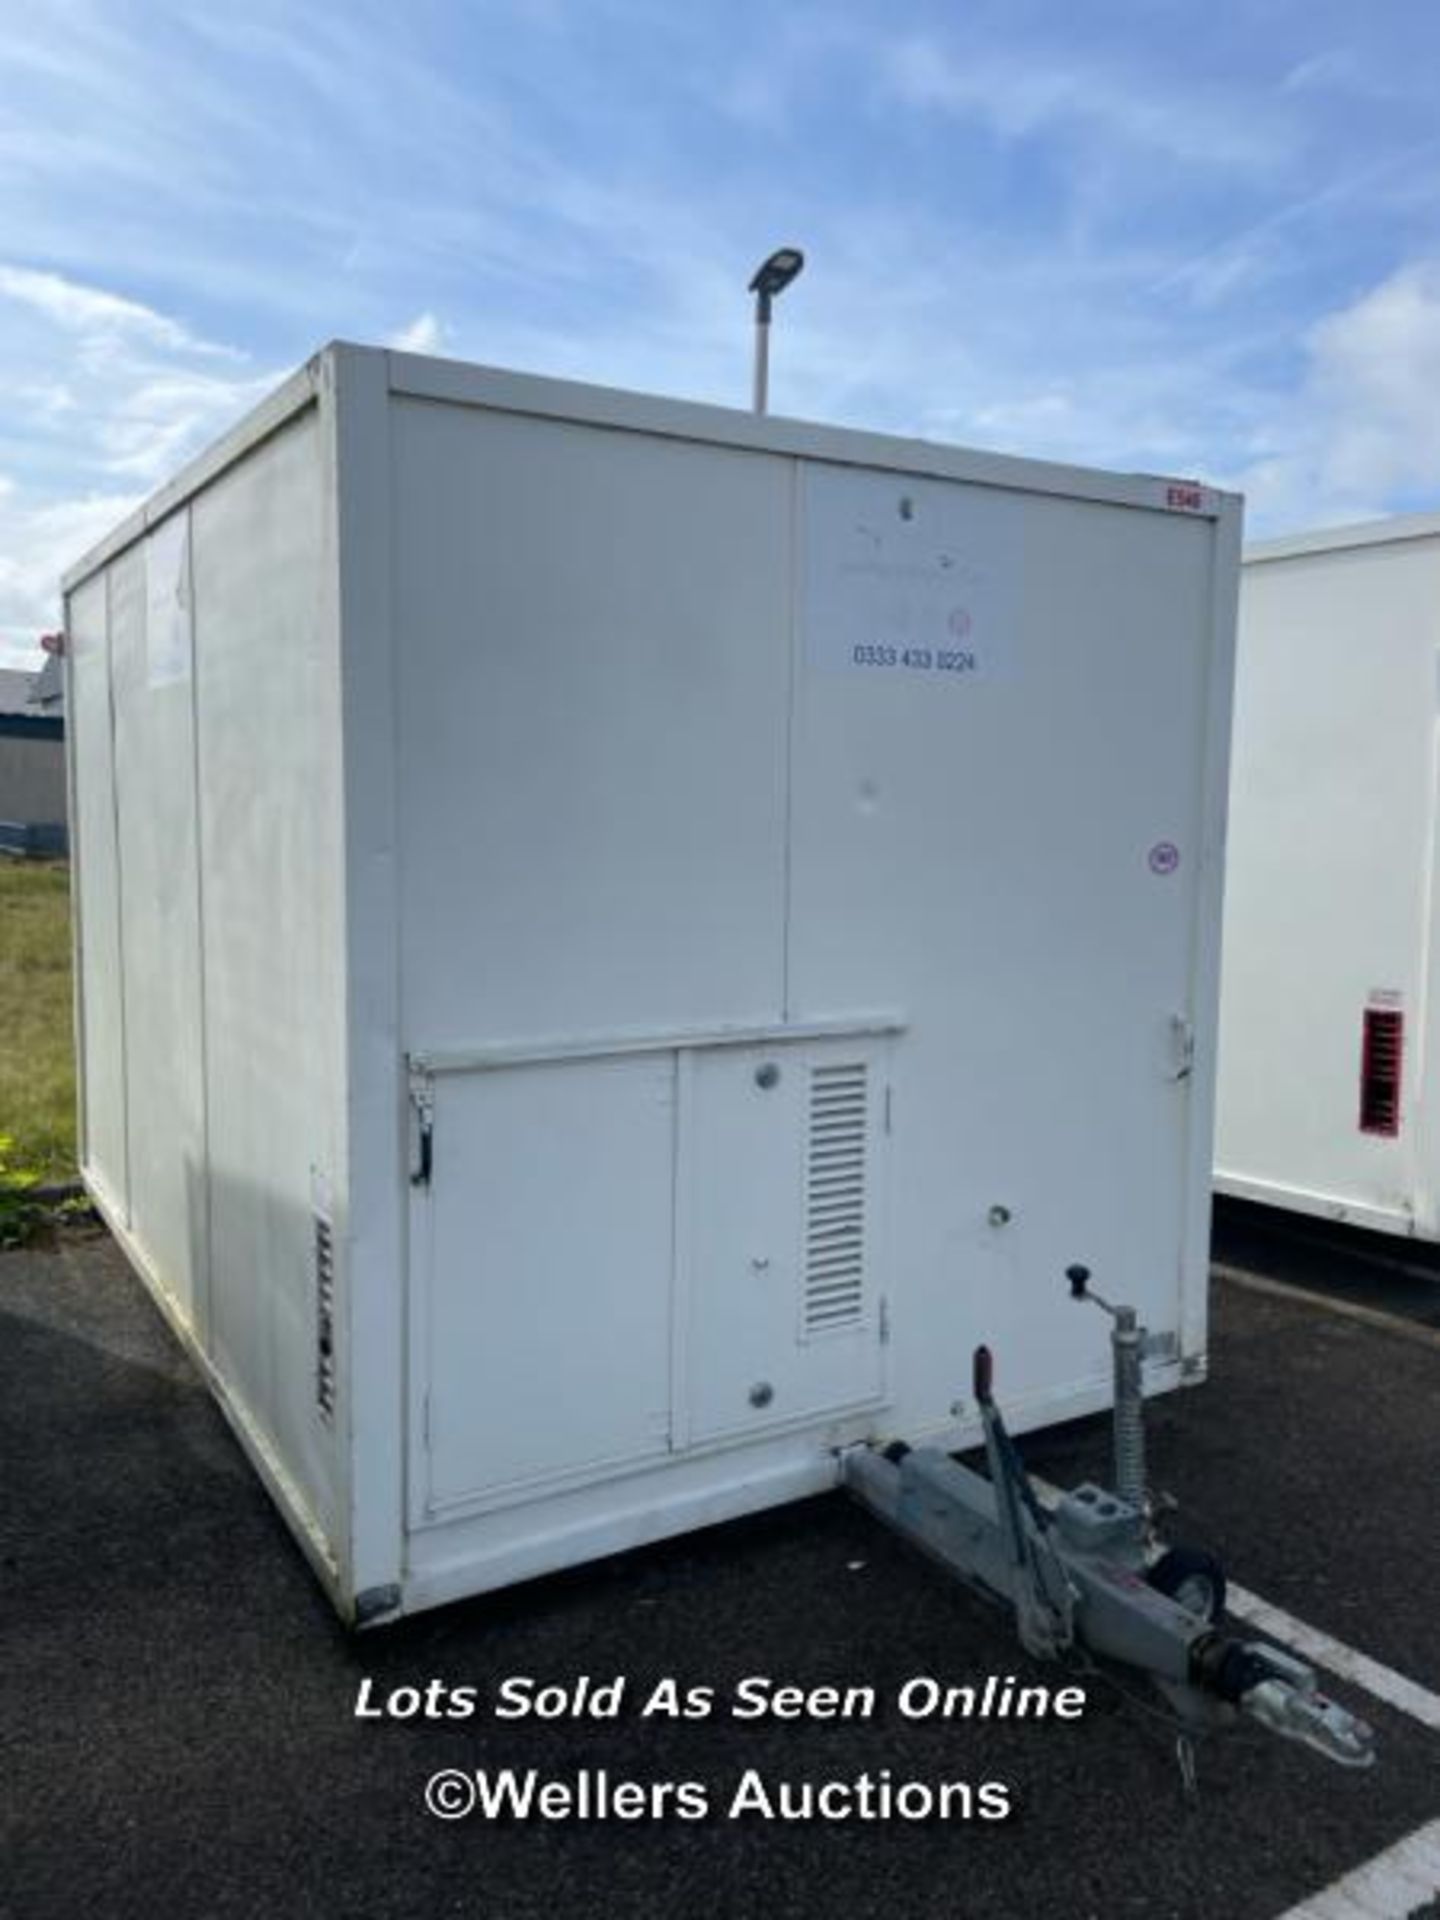 6 PERSON 12 X 7.5FT AJC EASY CABIN TOWABLE WELFARE UNIT, INCLUDES WASH BASIN, KETTLE, MICROWAVE,